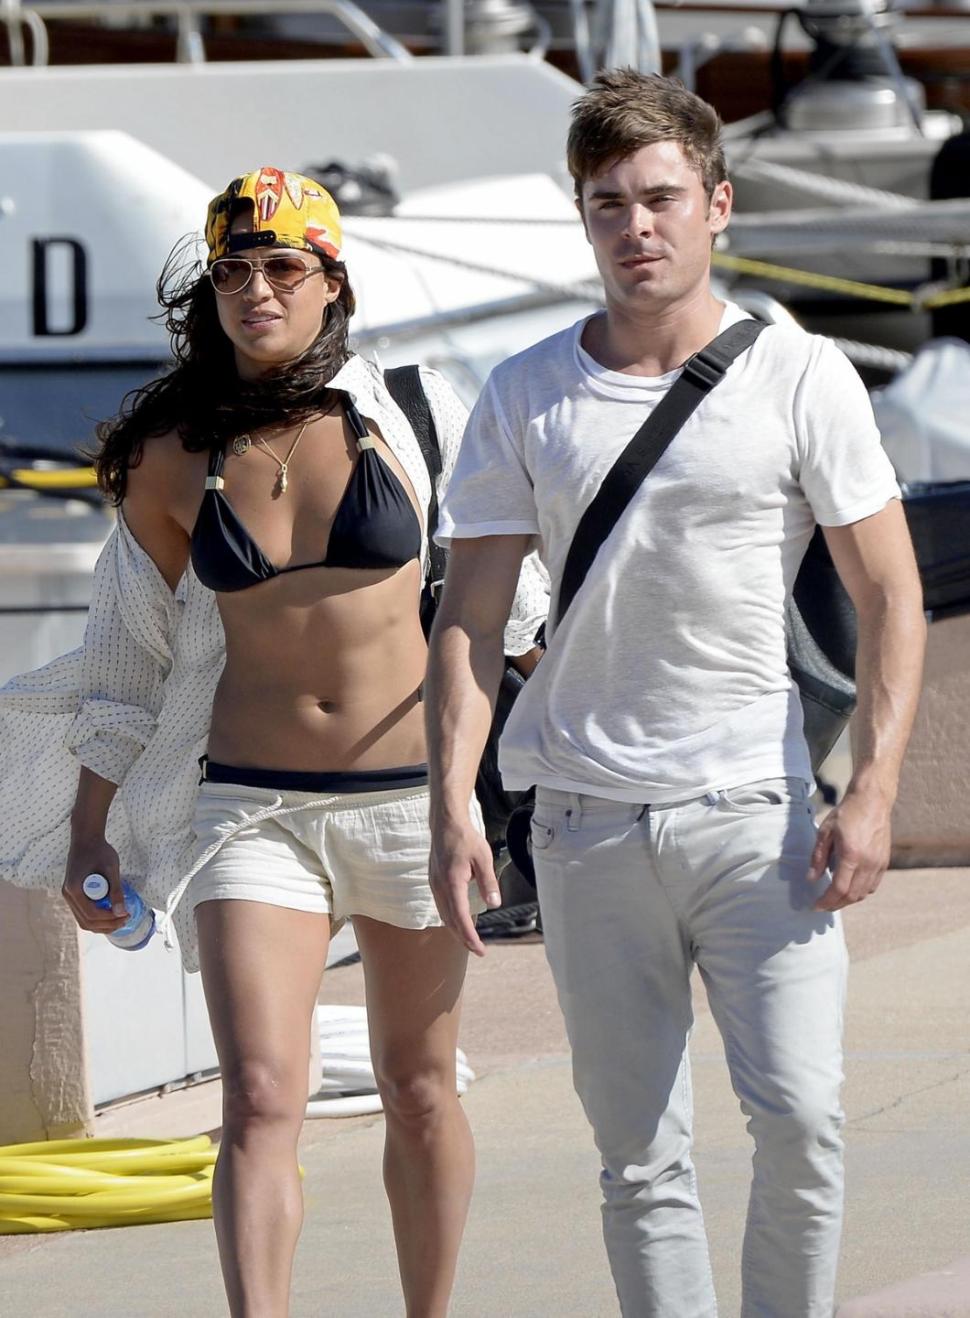 The hookup is apparently over for Michelle Rodriguez (l.) and Zac Efron, though a source claims he still wants to date the ‘Fast & Furious’ actress.